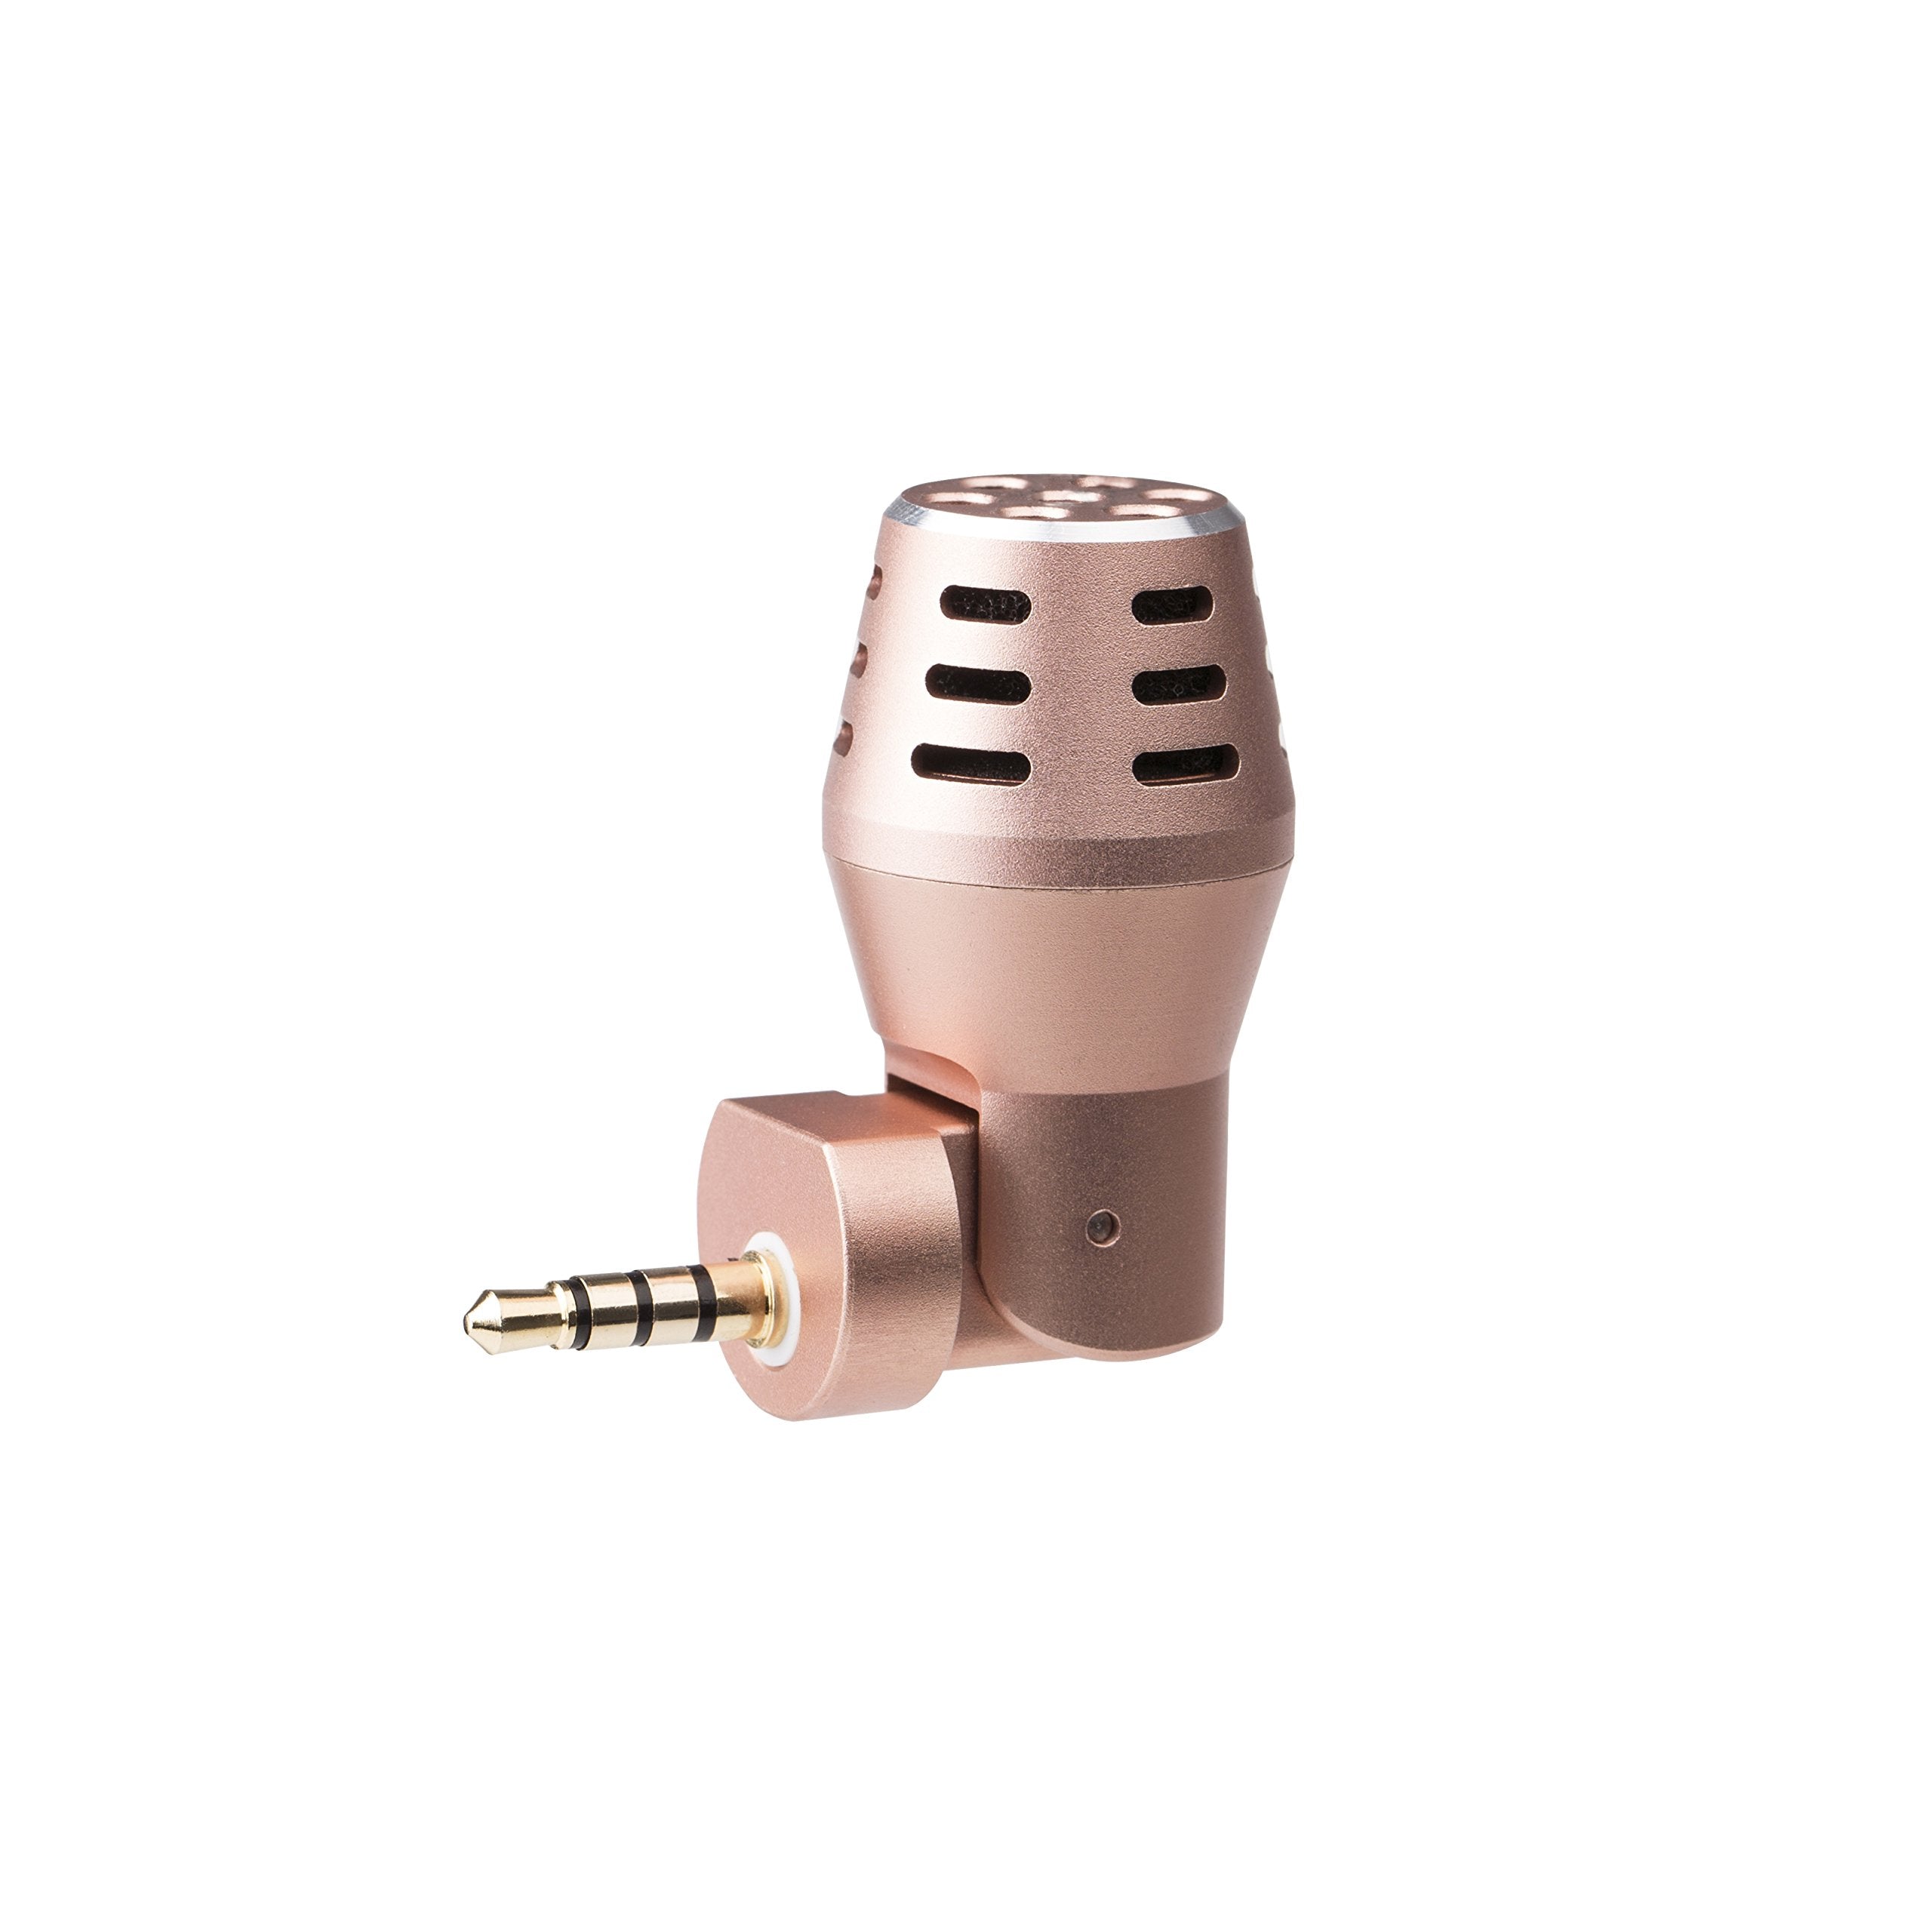 Movo MA200 Omni-Directional Calibrated TRRS Condenser Microphone for Apple iPhone, iPod Touch, iPad (Rose Gold)  - Like New